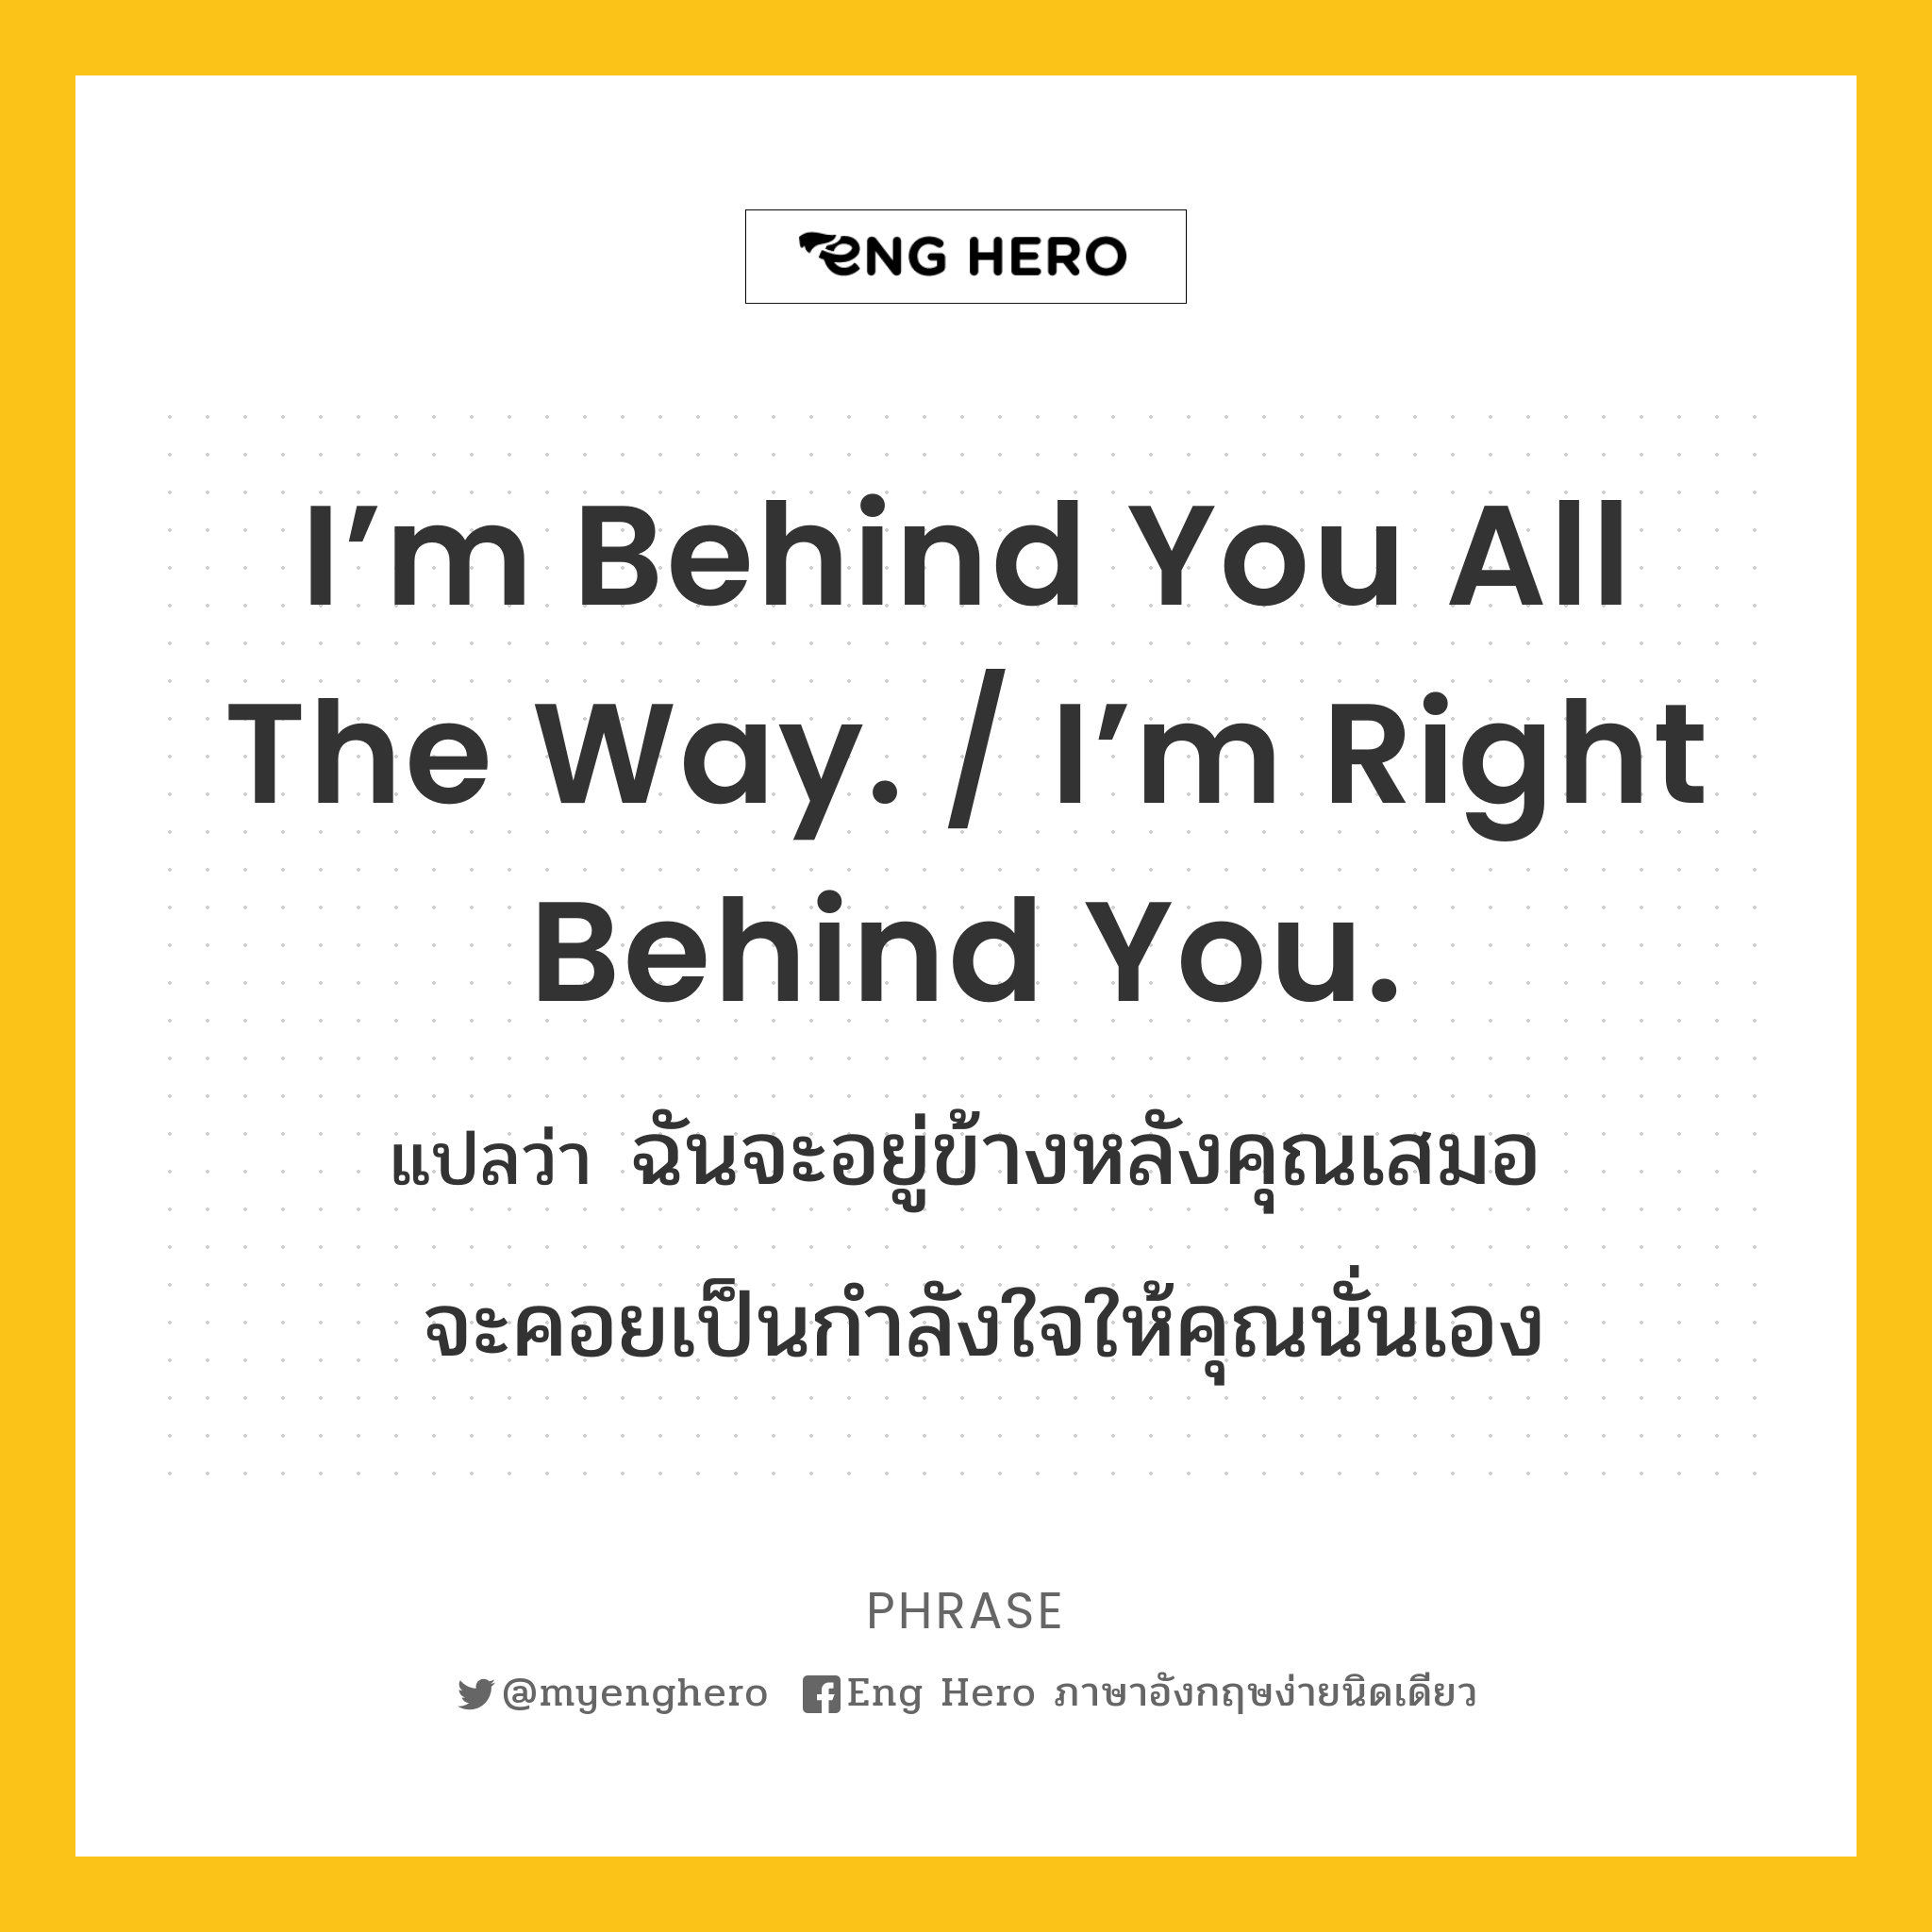 I’m behind you all the way. / I’m right behind you.